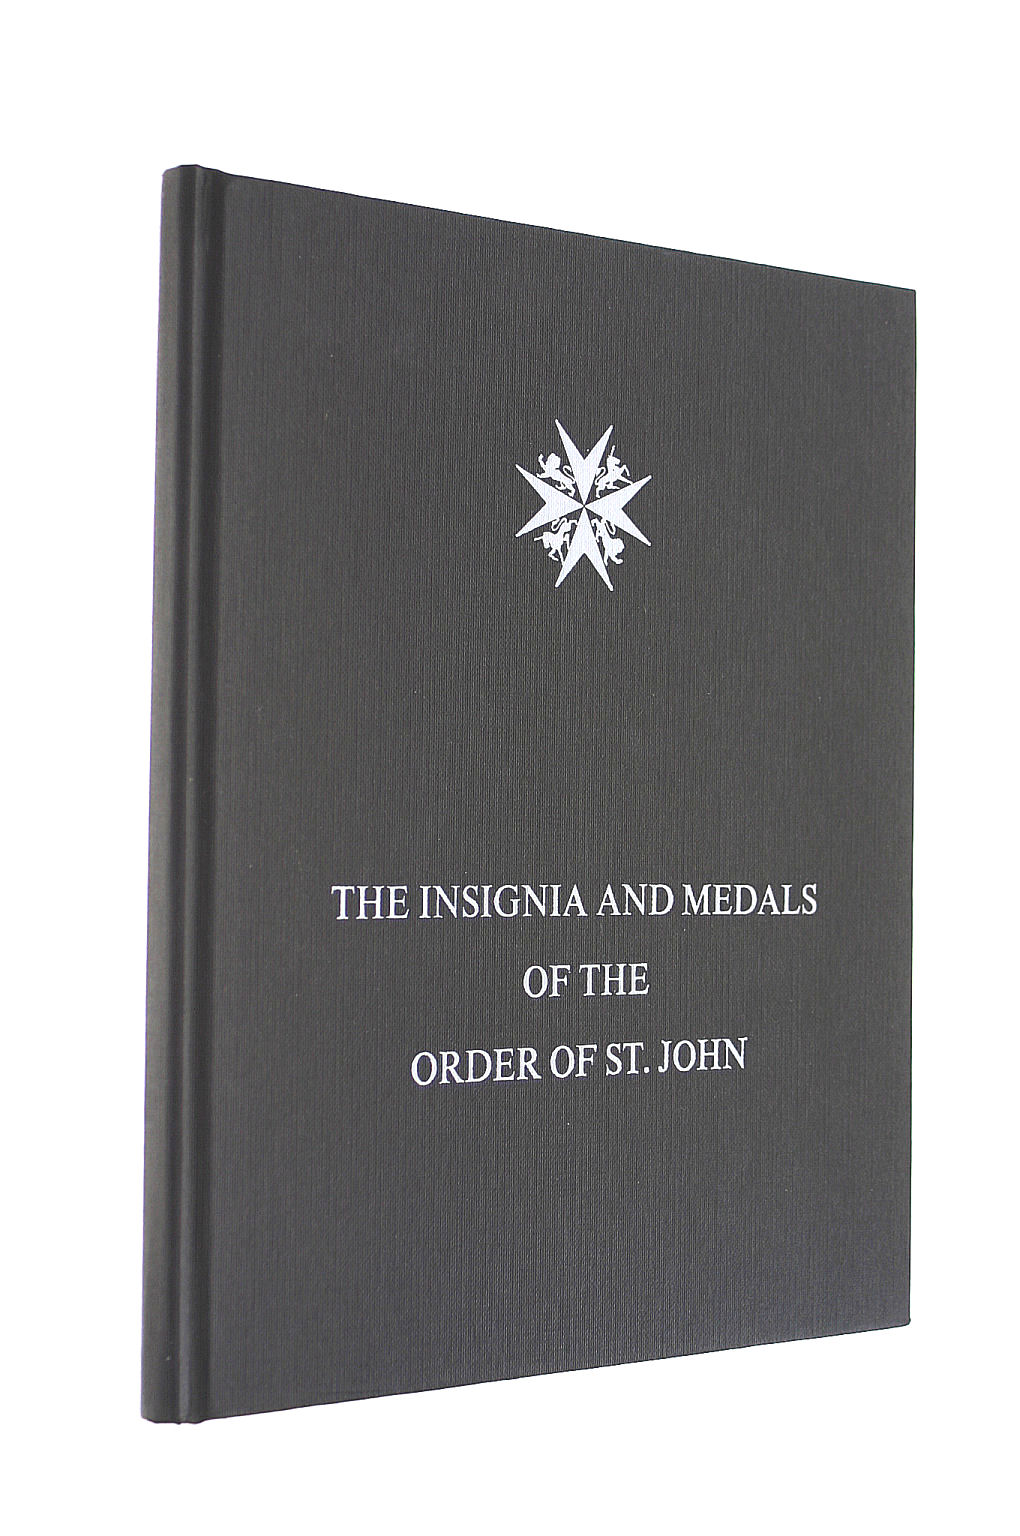 TOZER CHARLES - The insignia and medals of the Grand Priory of the Most Venerable Order of the Hospital of St. John of Jerusalem (Special publications)